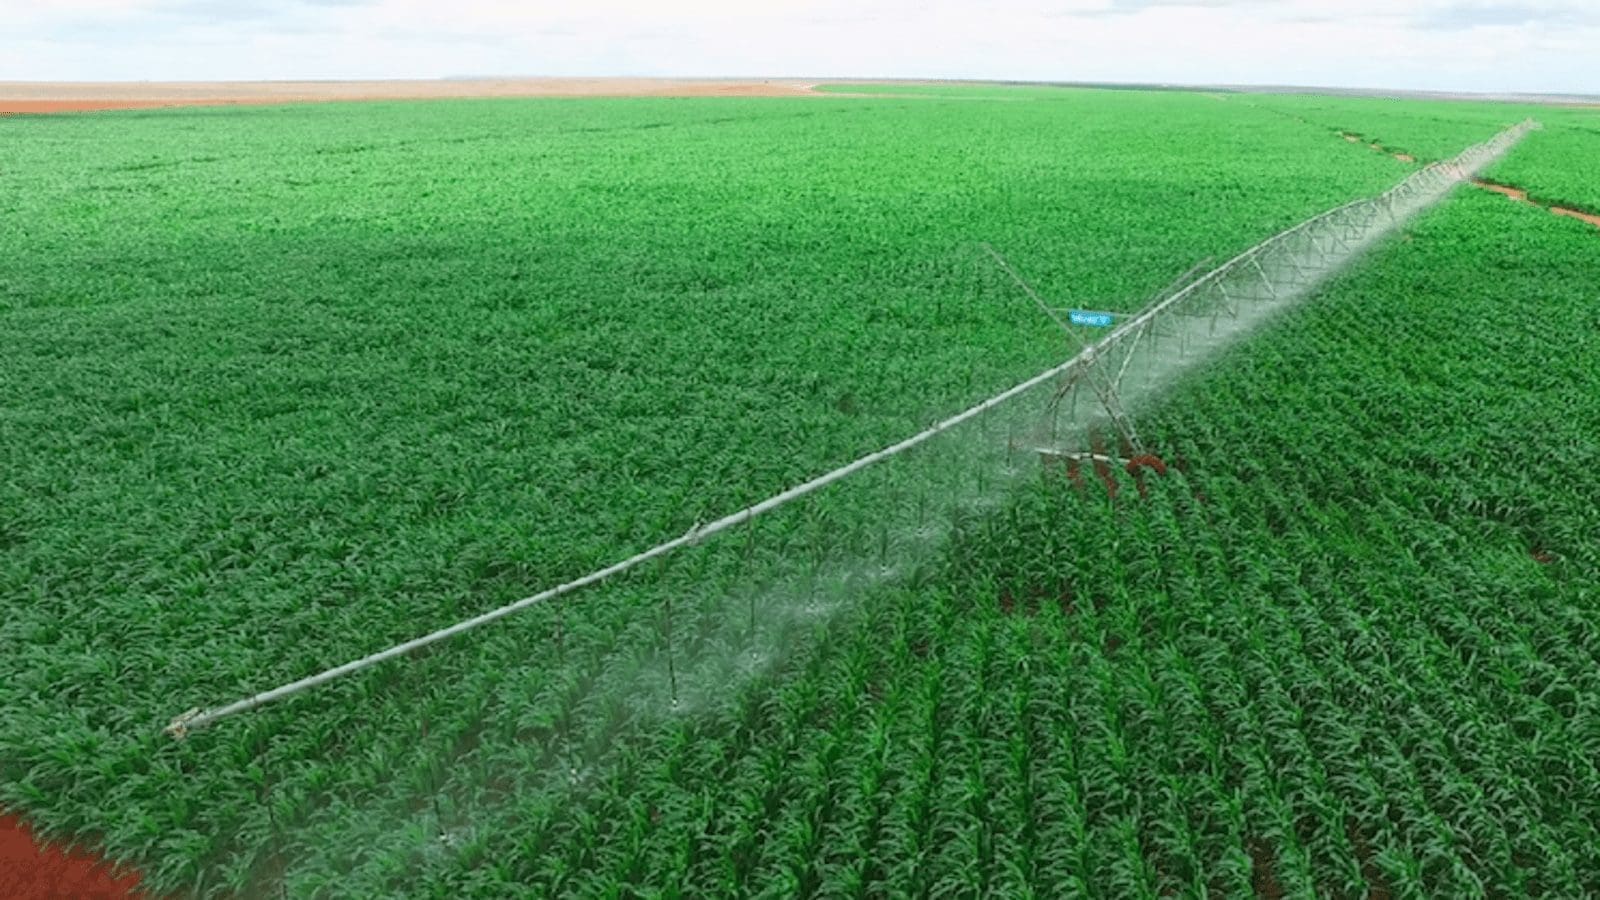 Kenya shifts focus to irrigation as the solution to food security, targets 3M acres by 2030